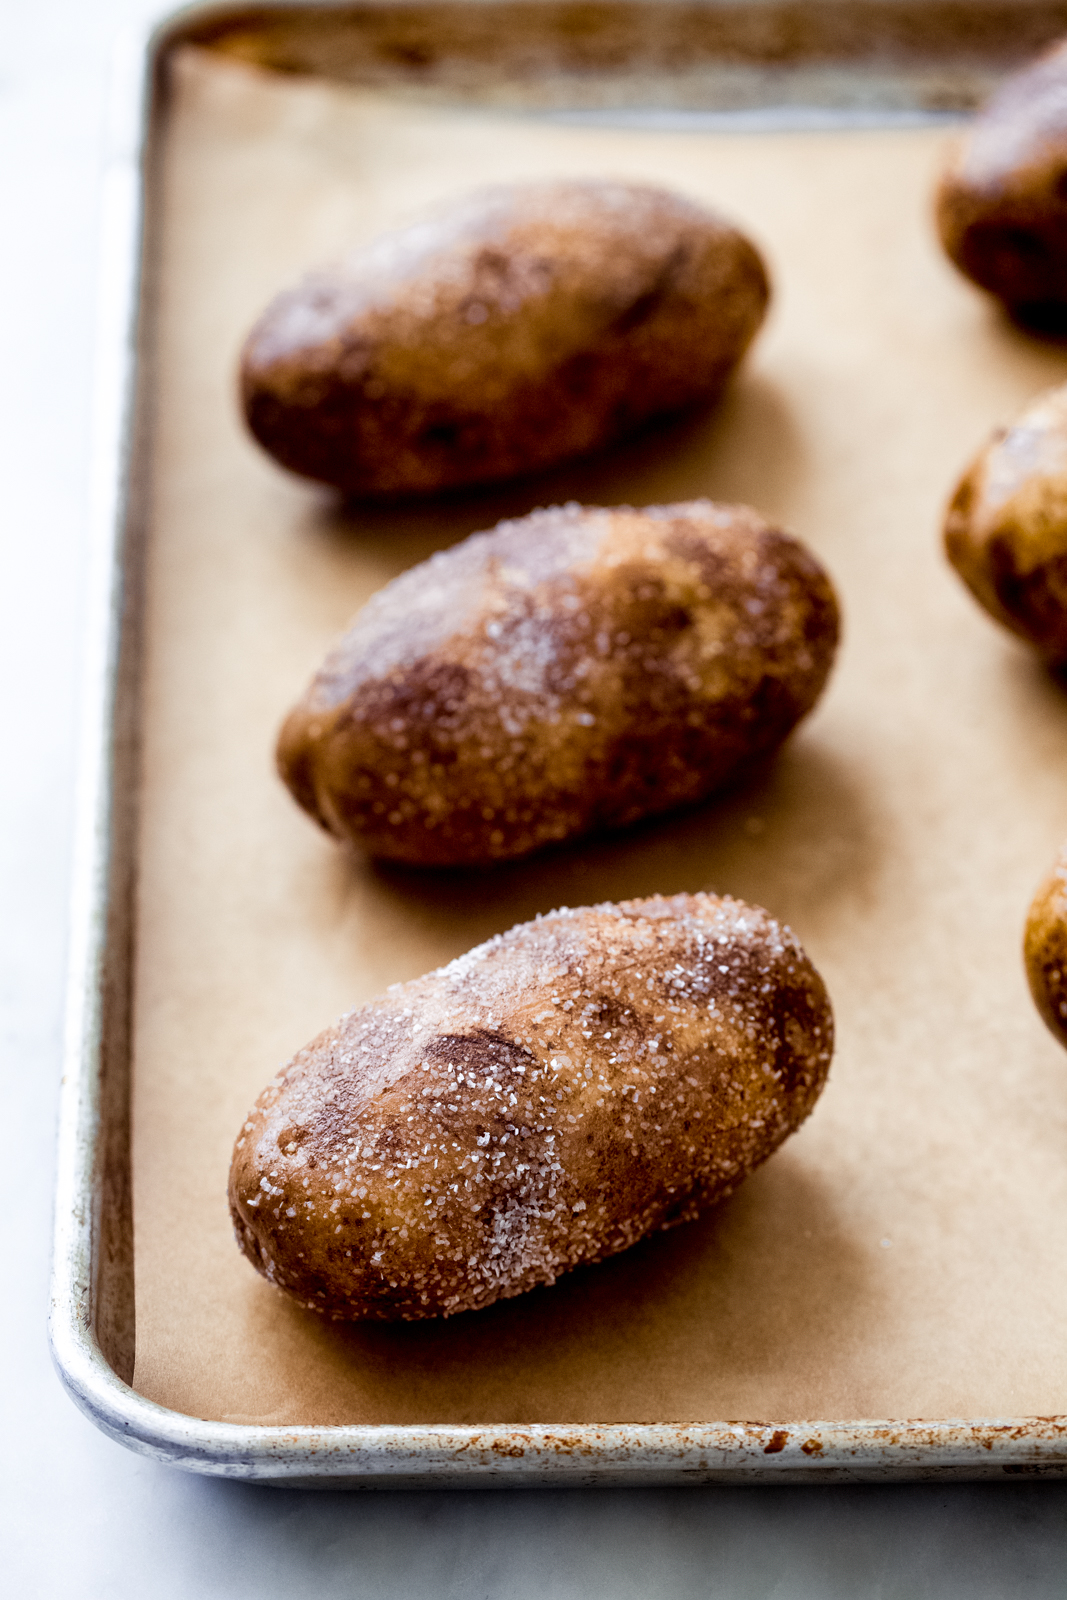 freshly baked potatoes with salted crust